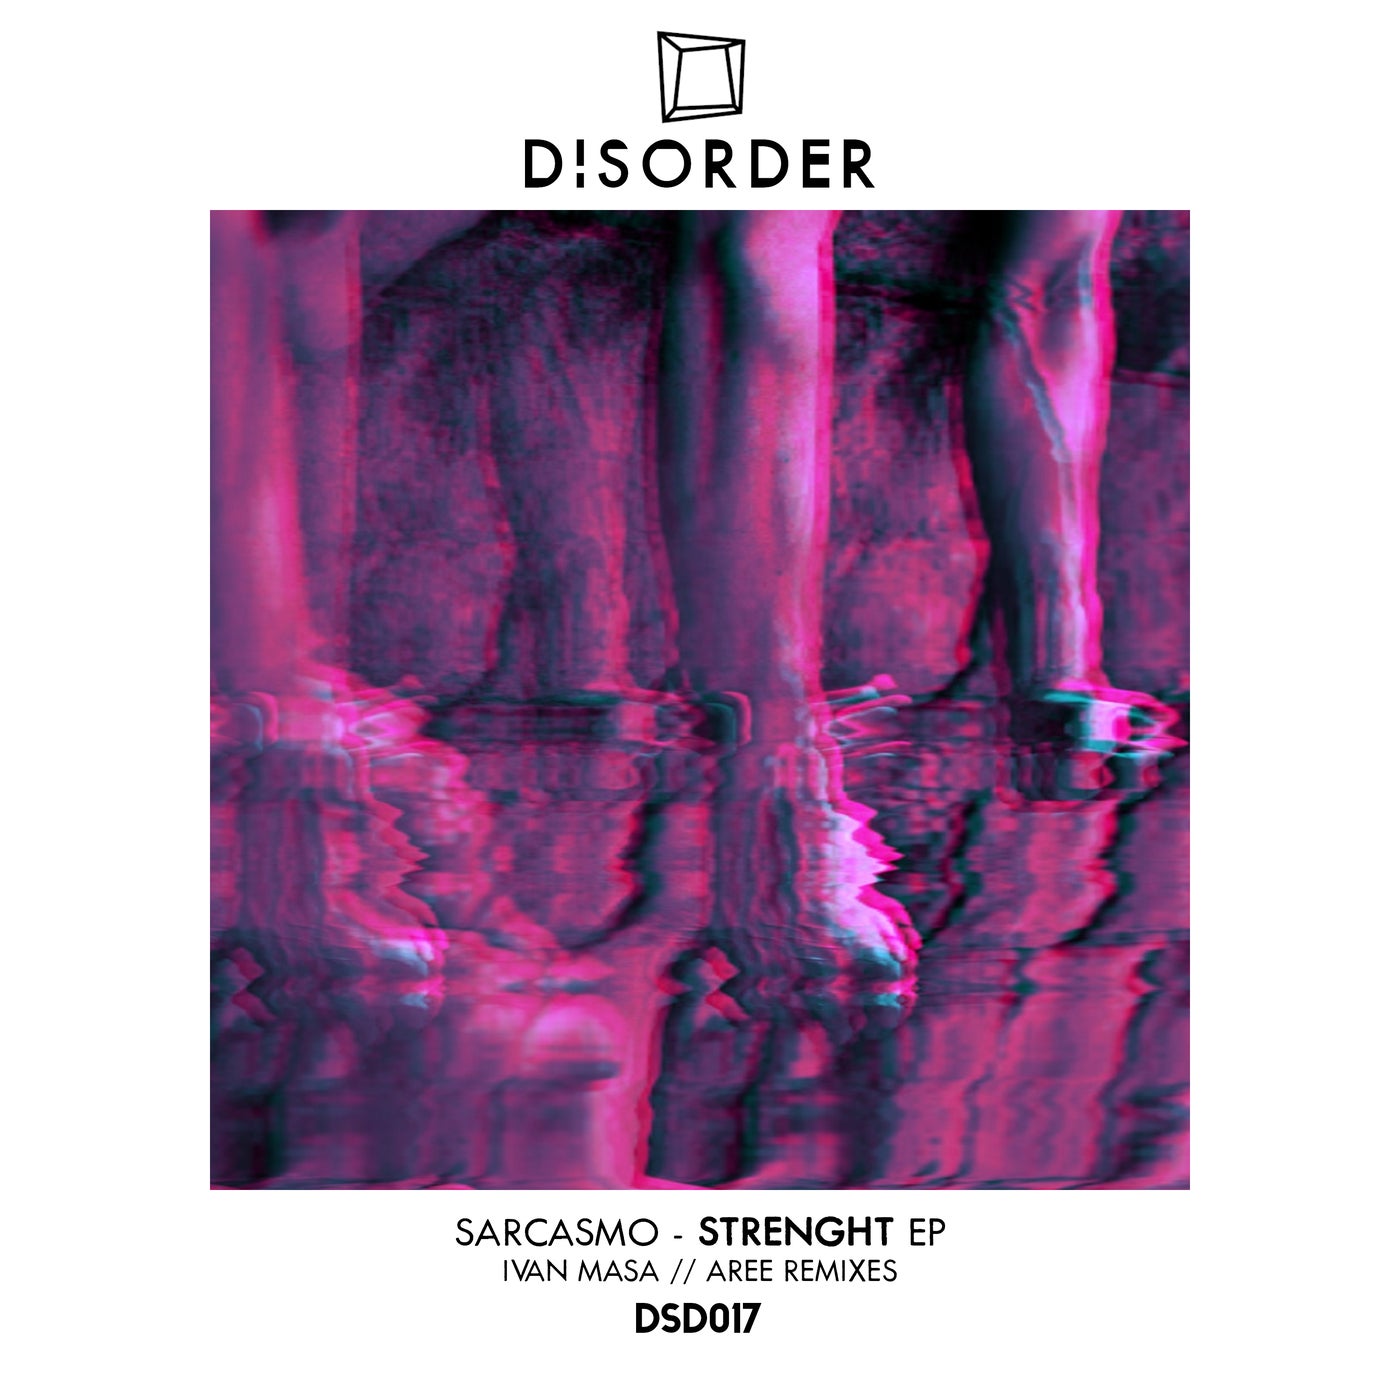 Strenght EP